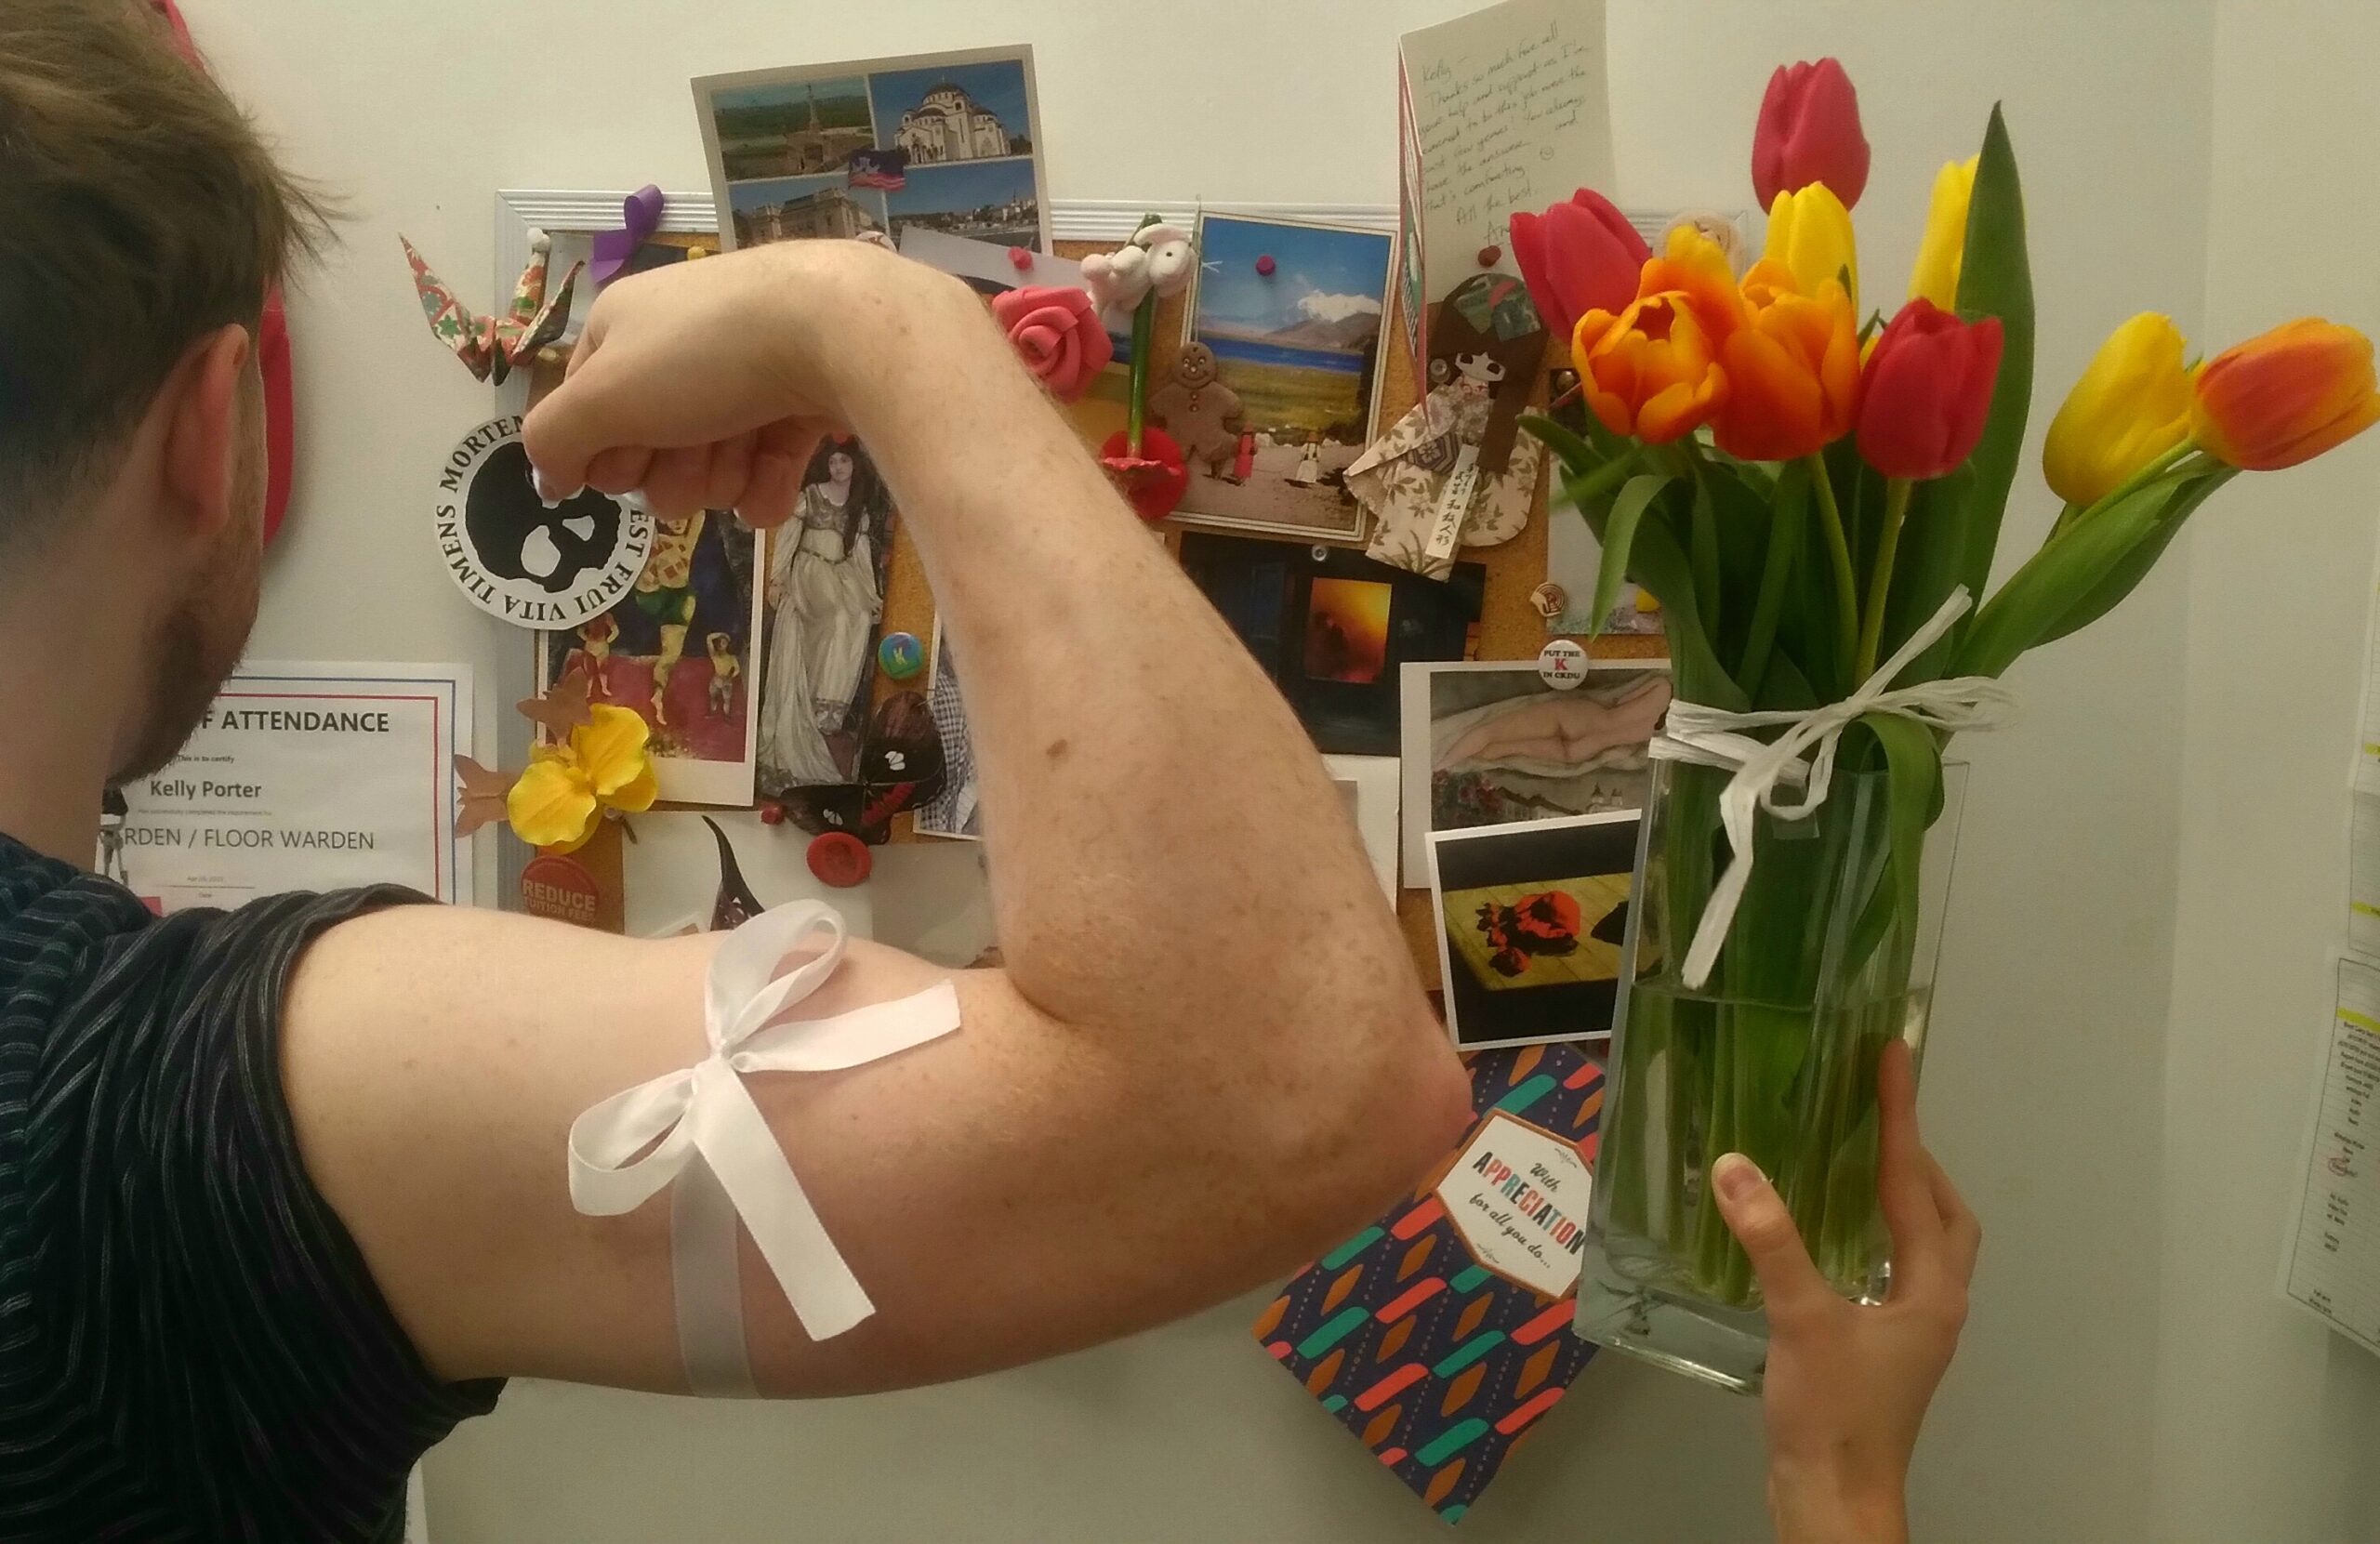 Males bicep with a ribbon around it. Tulips with a bow